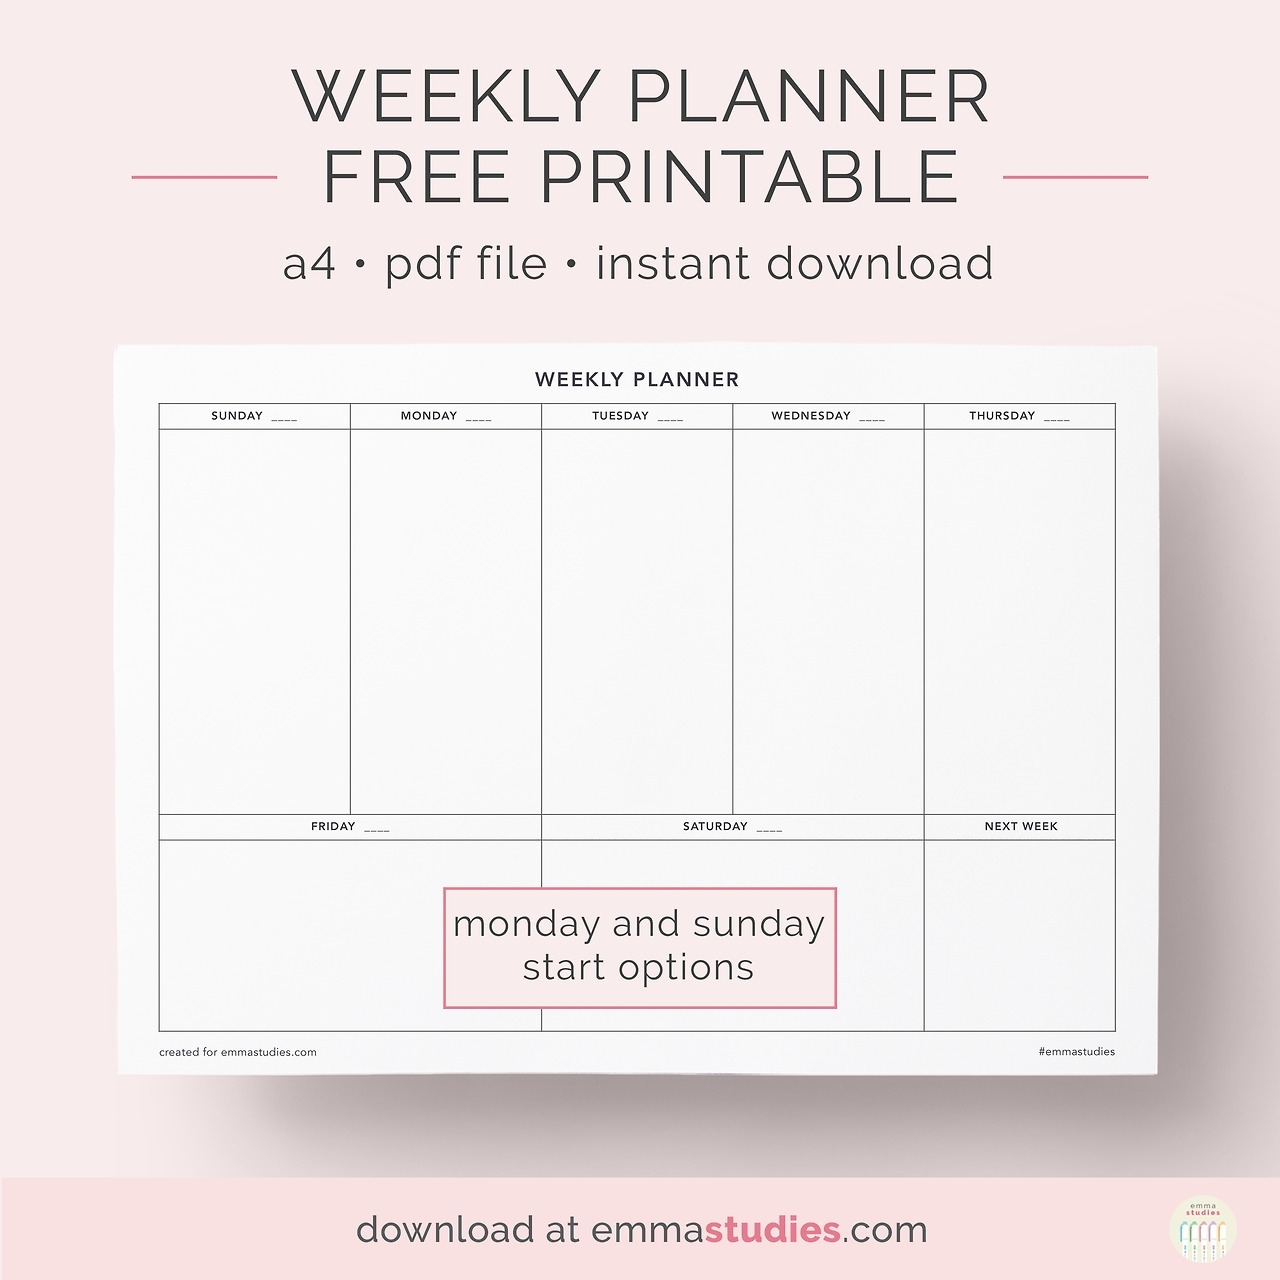 Take Weekly Planner Monday To Friday